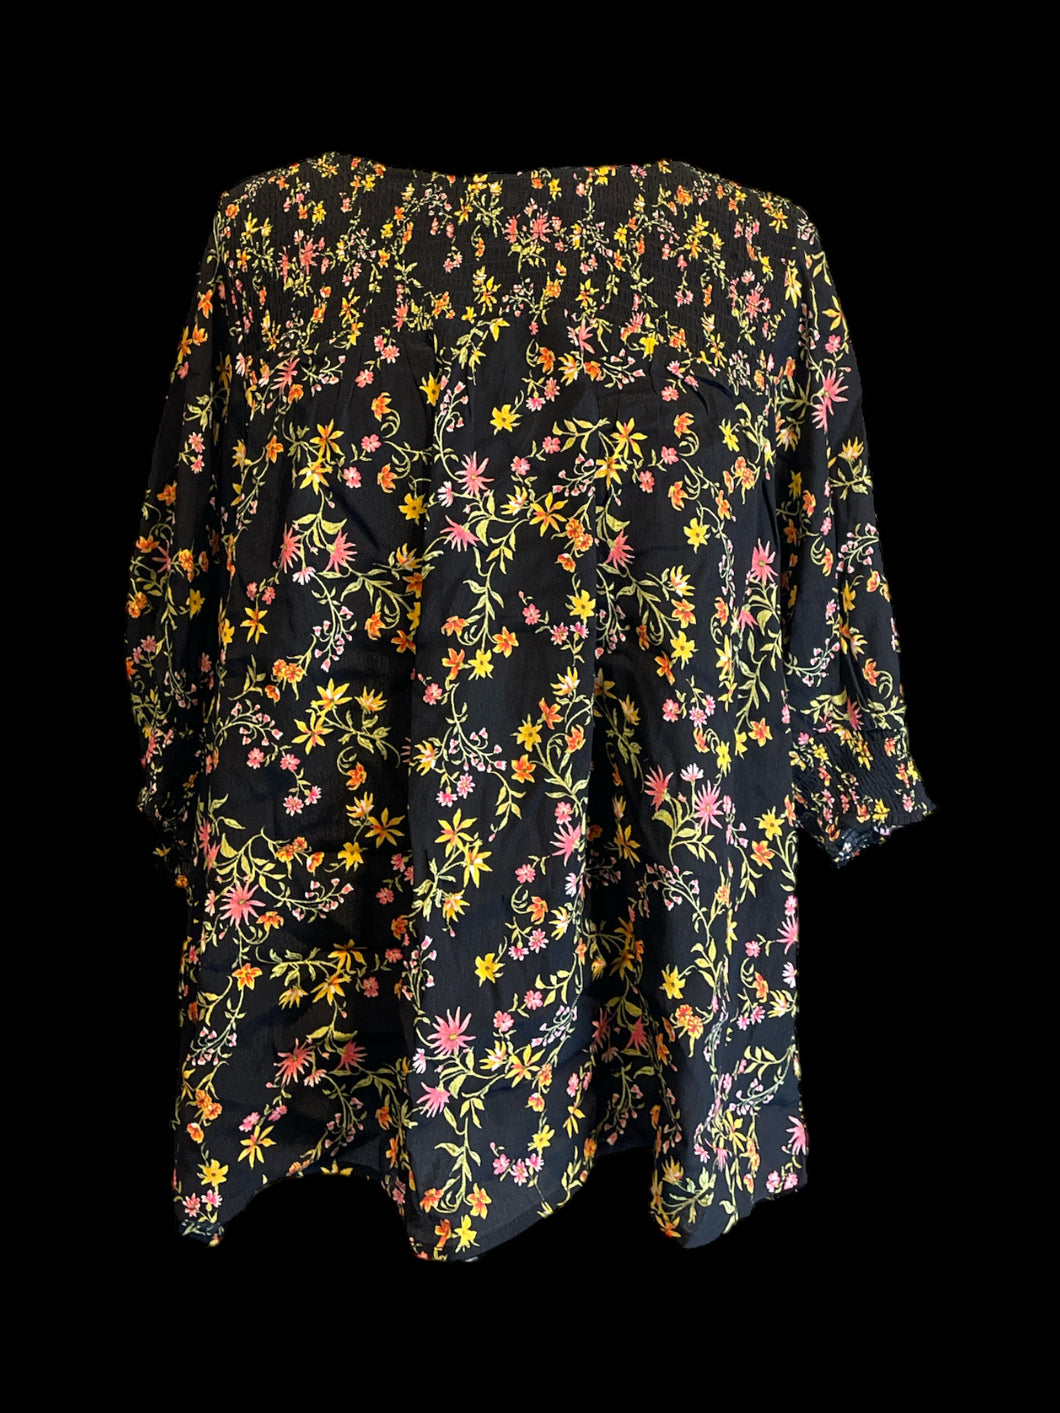 4X NWT Black scoopneck top w/ yellow & pink floral pattern, shired waist, 3/4 balloon sleeves, & back button keyhole closure